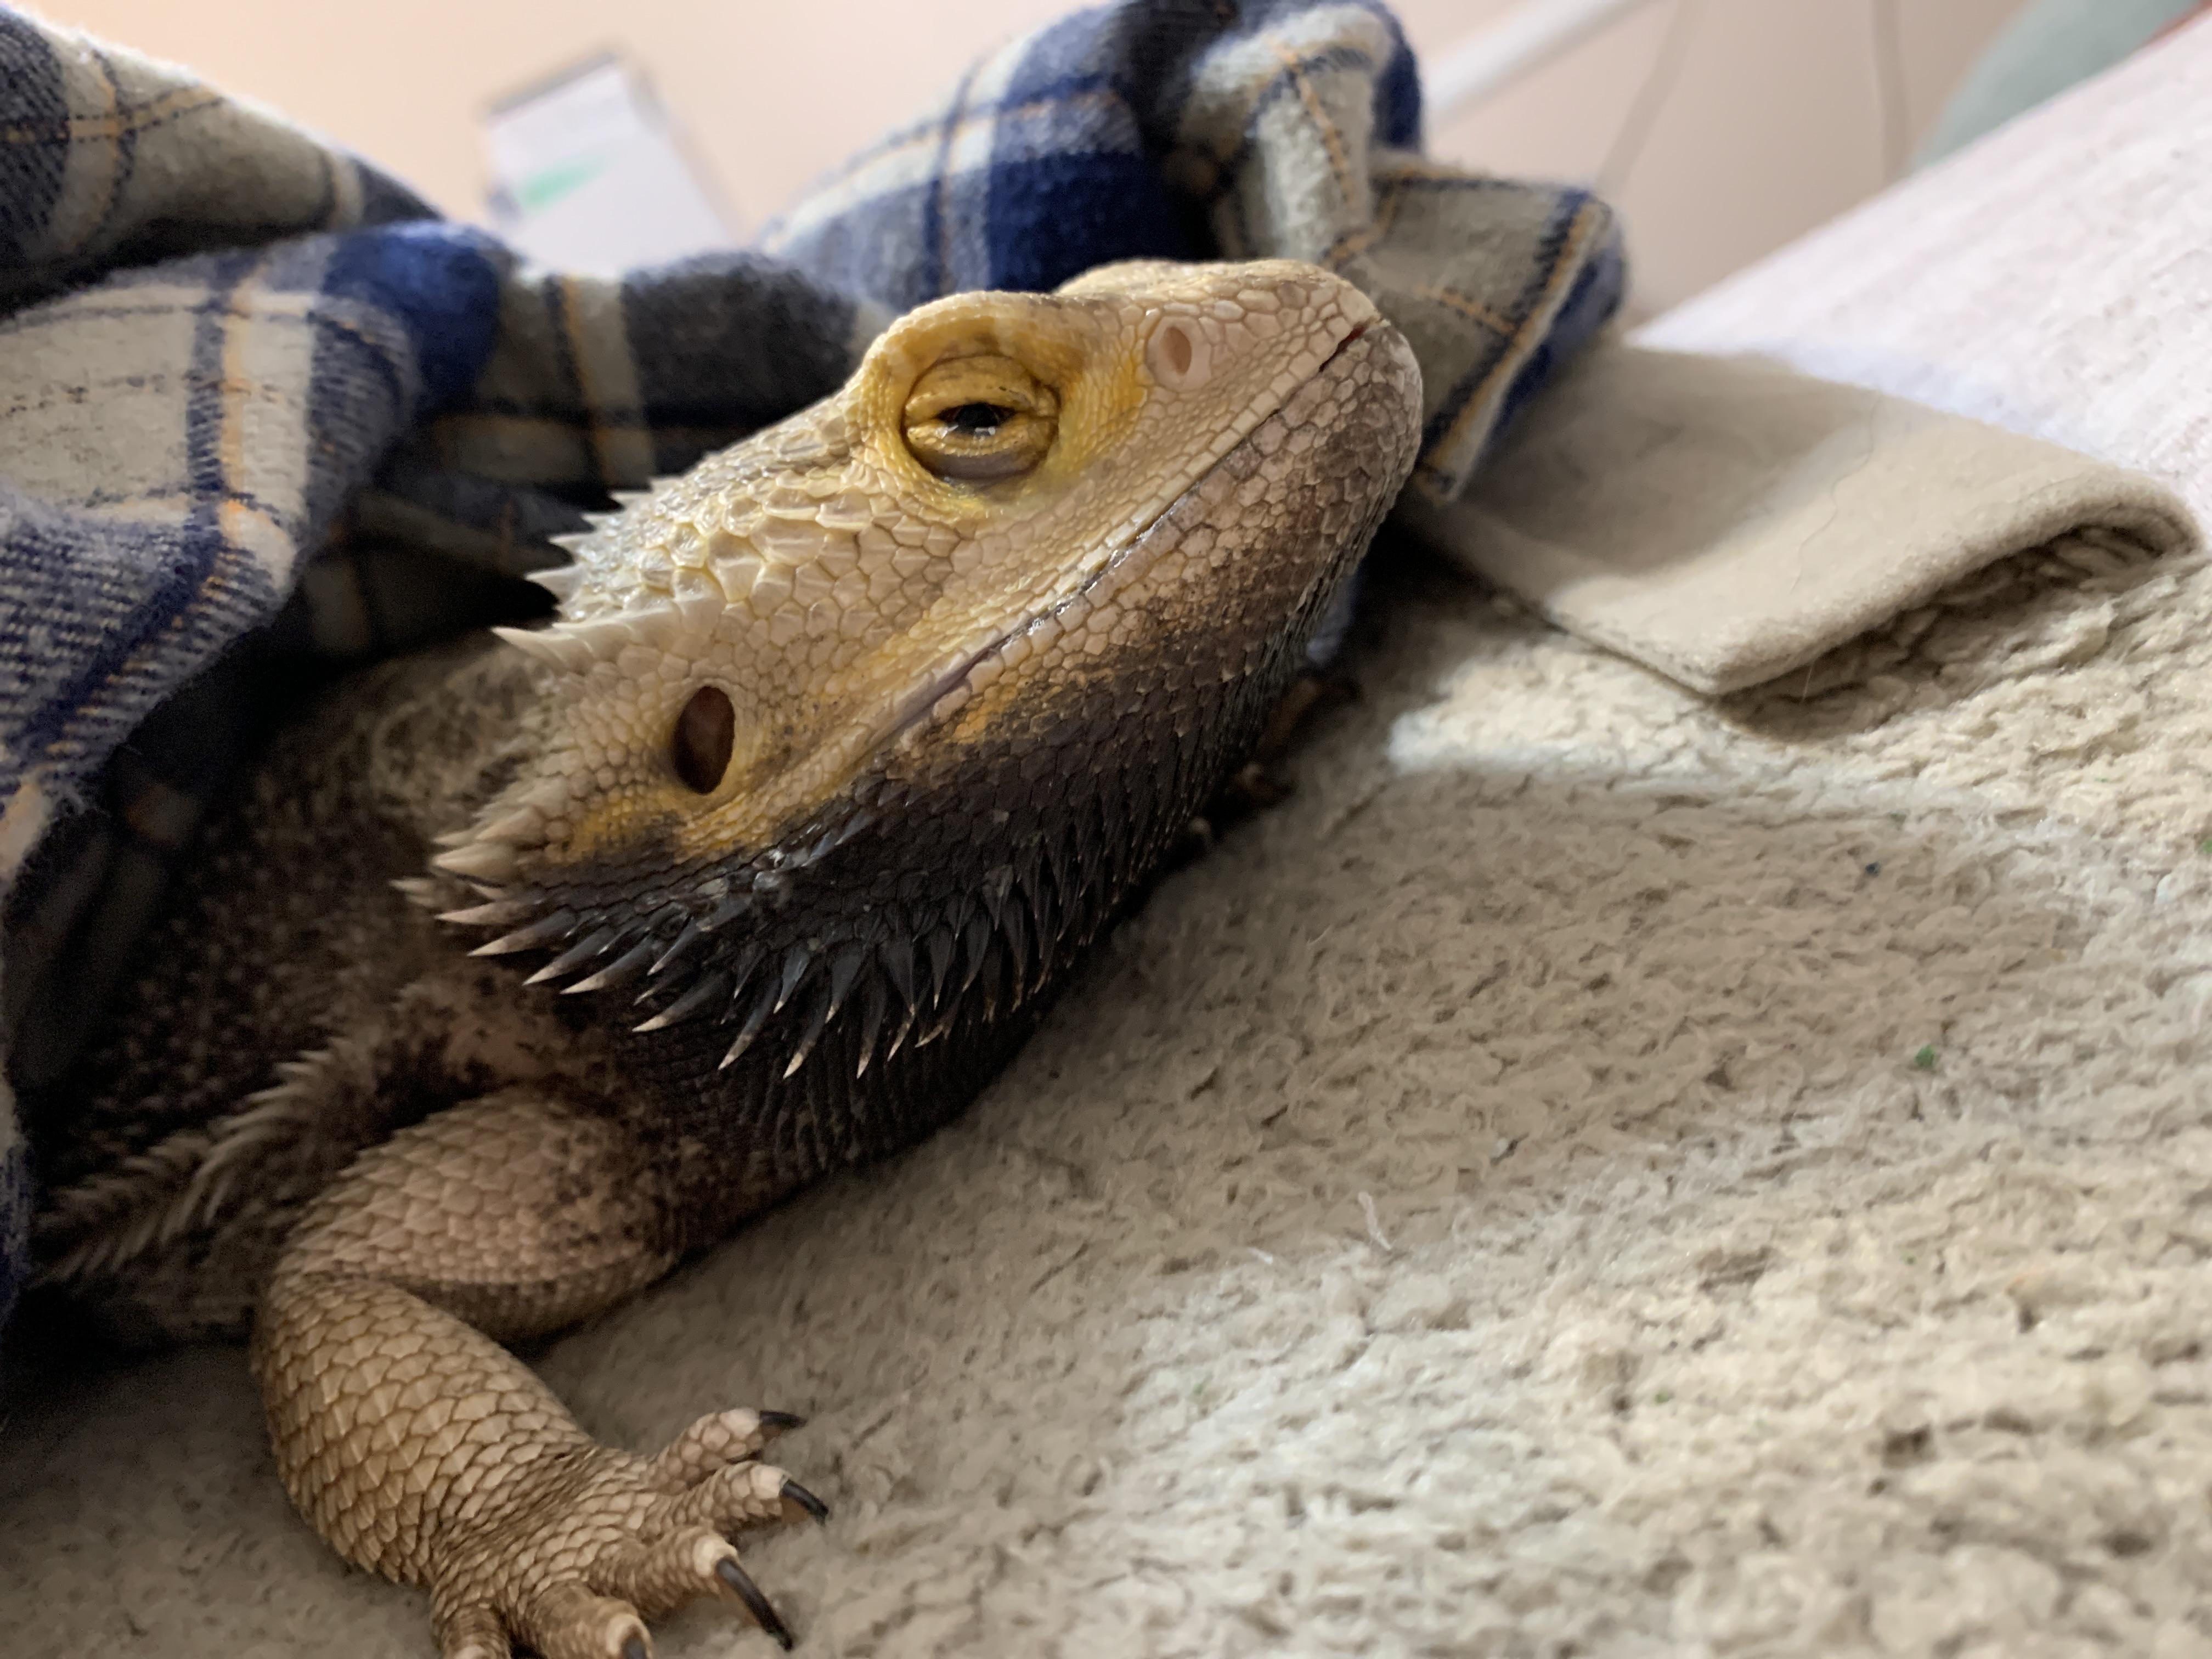 bearded dragon turned black and died